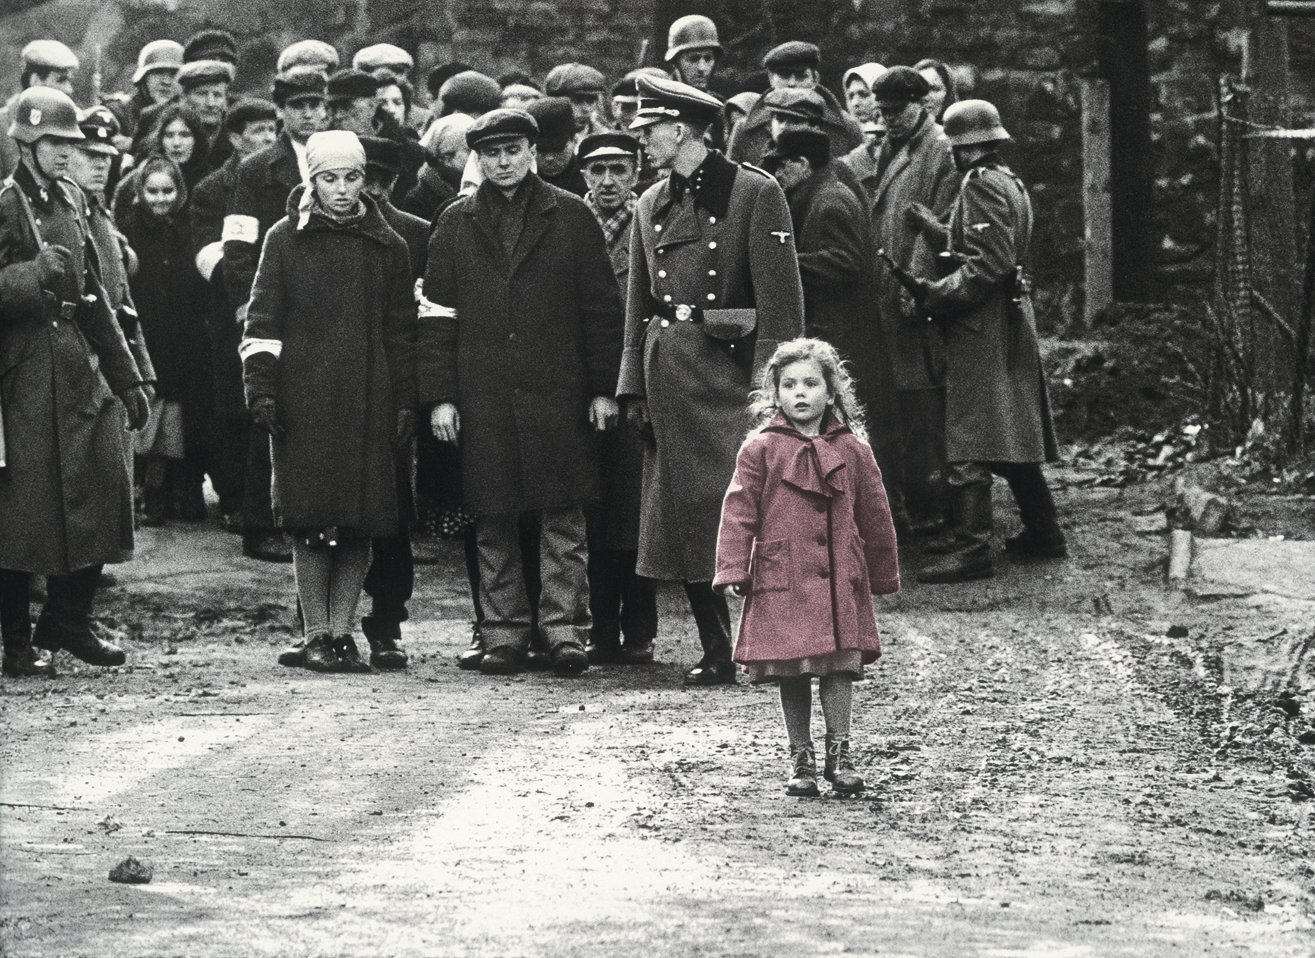 Amazing Schindler's List Pictures & Backgrounds